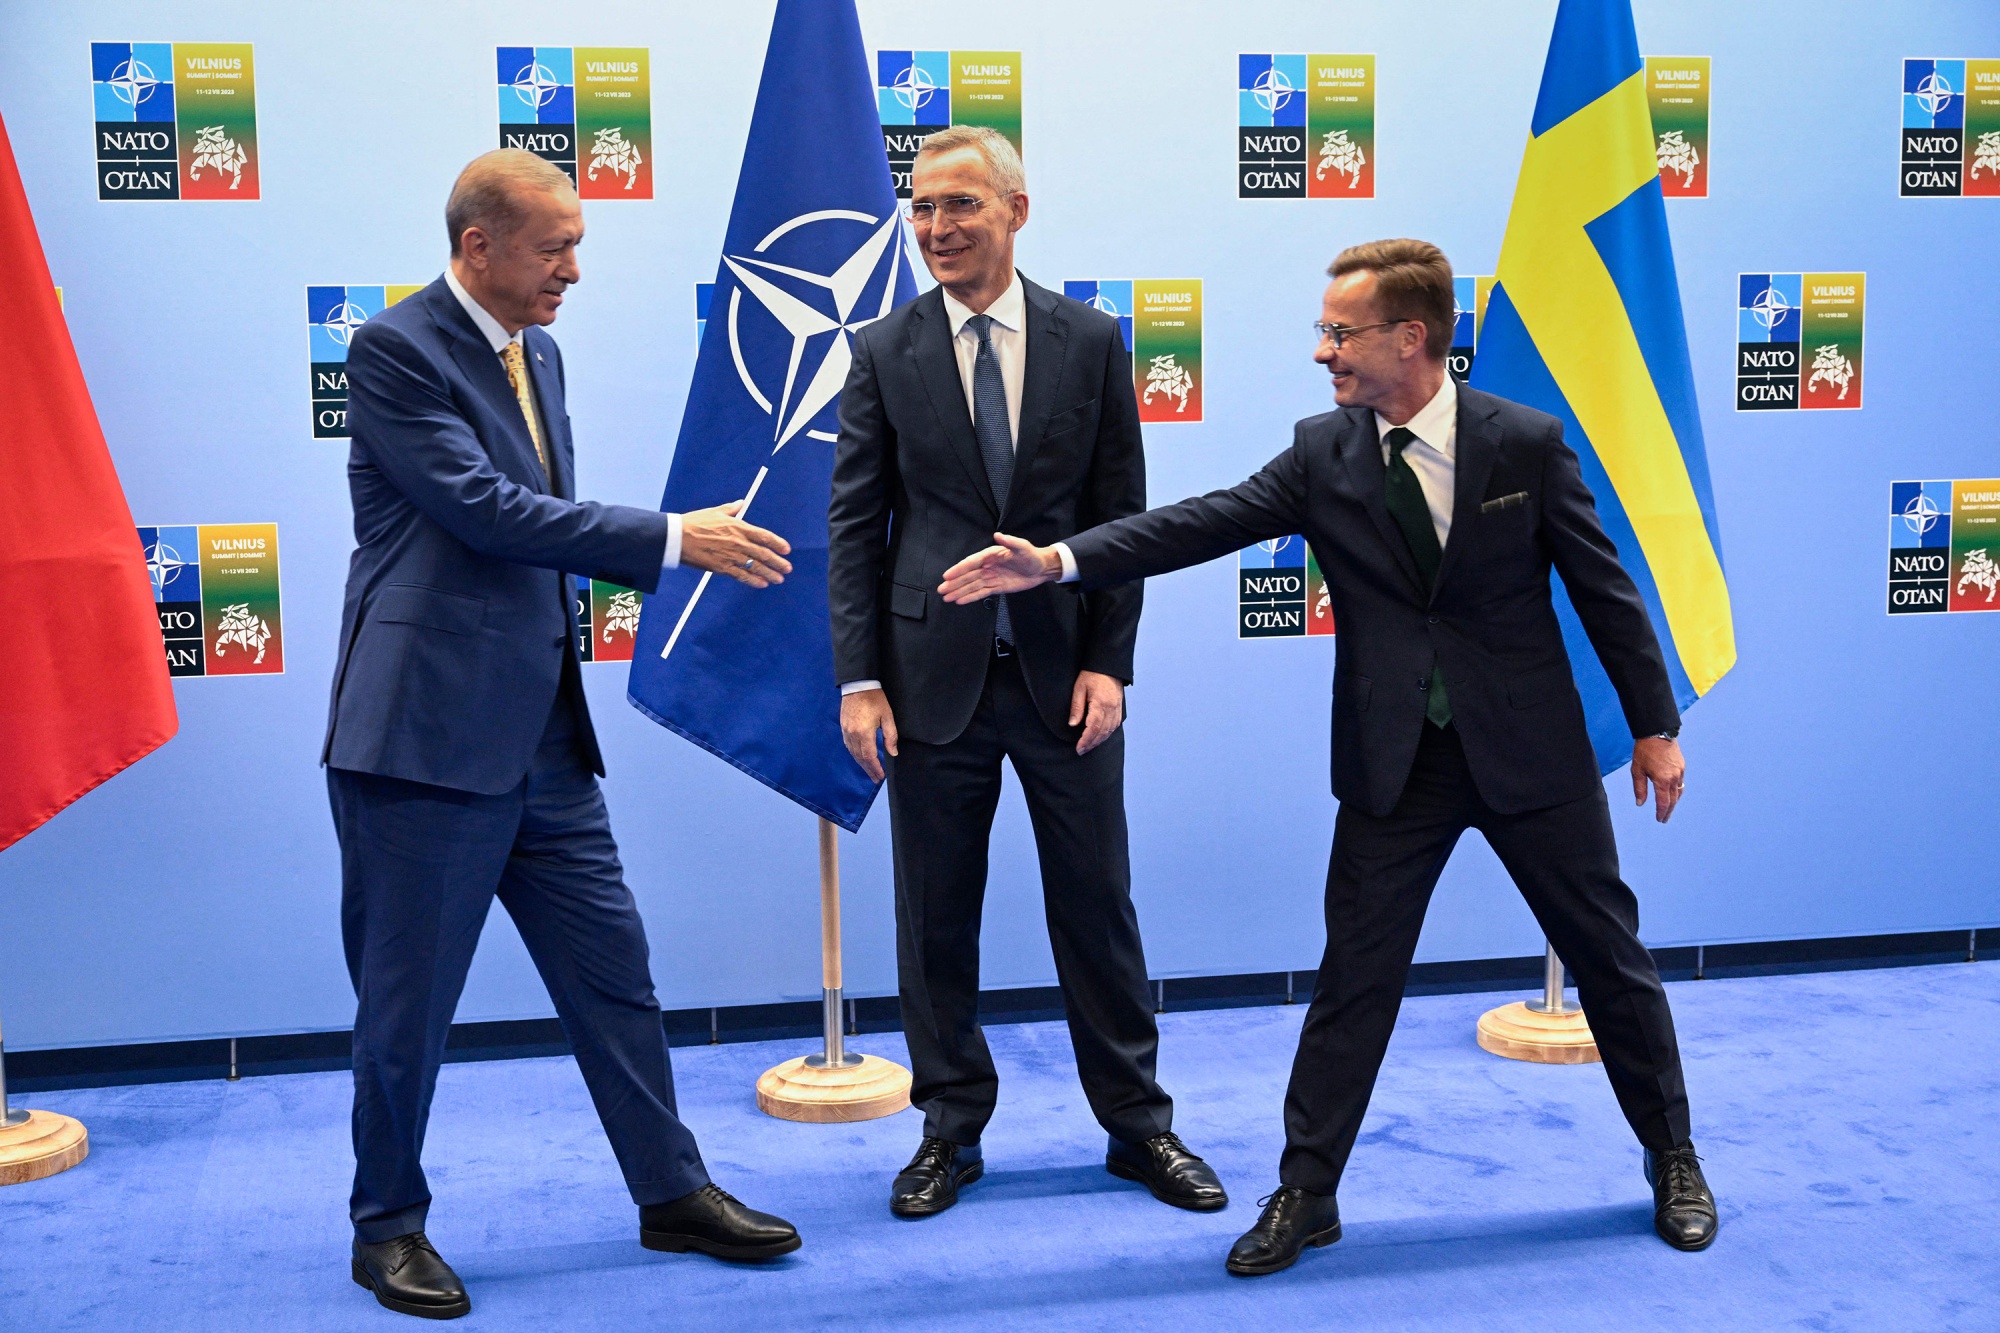 Saab anticipates fresh opportunities if Sweden joins Nato